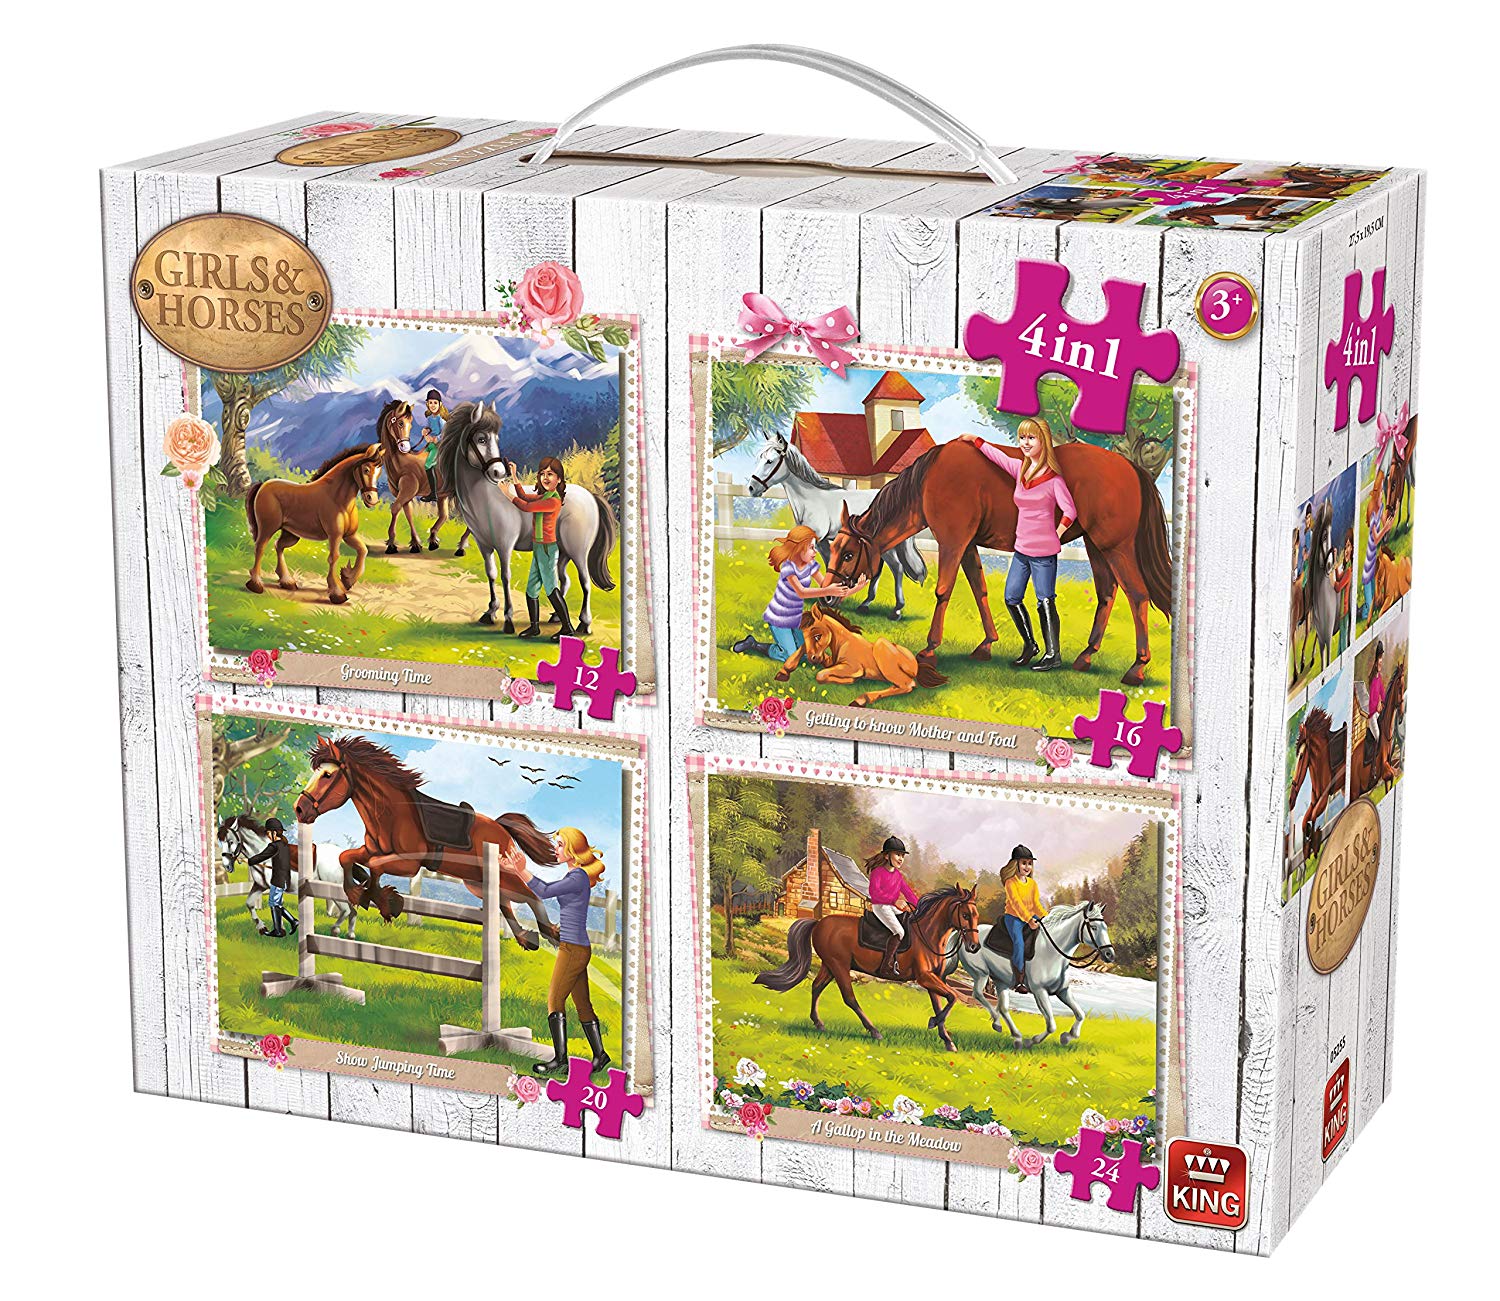 King 5255 Children's Puzzle 4 in 1 Girls and Horses, 12, 16, 20 and 24 Pcs